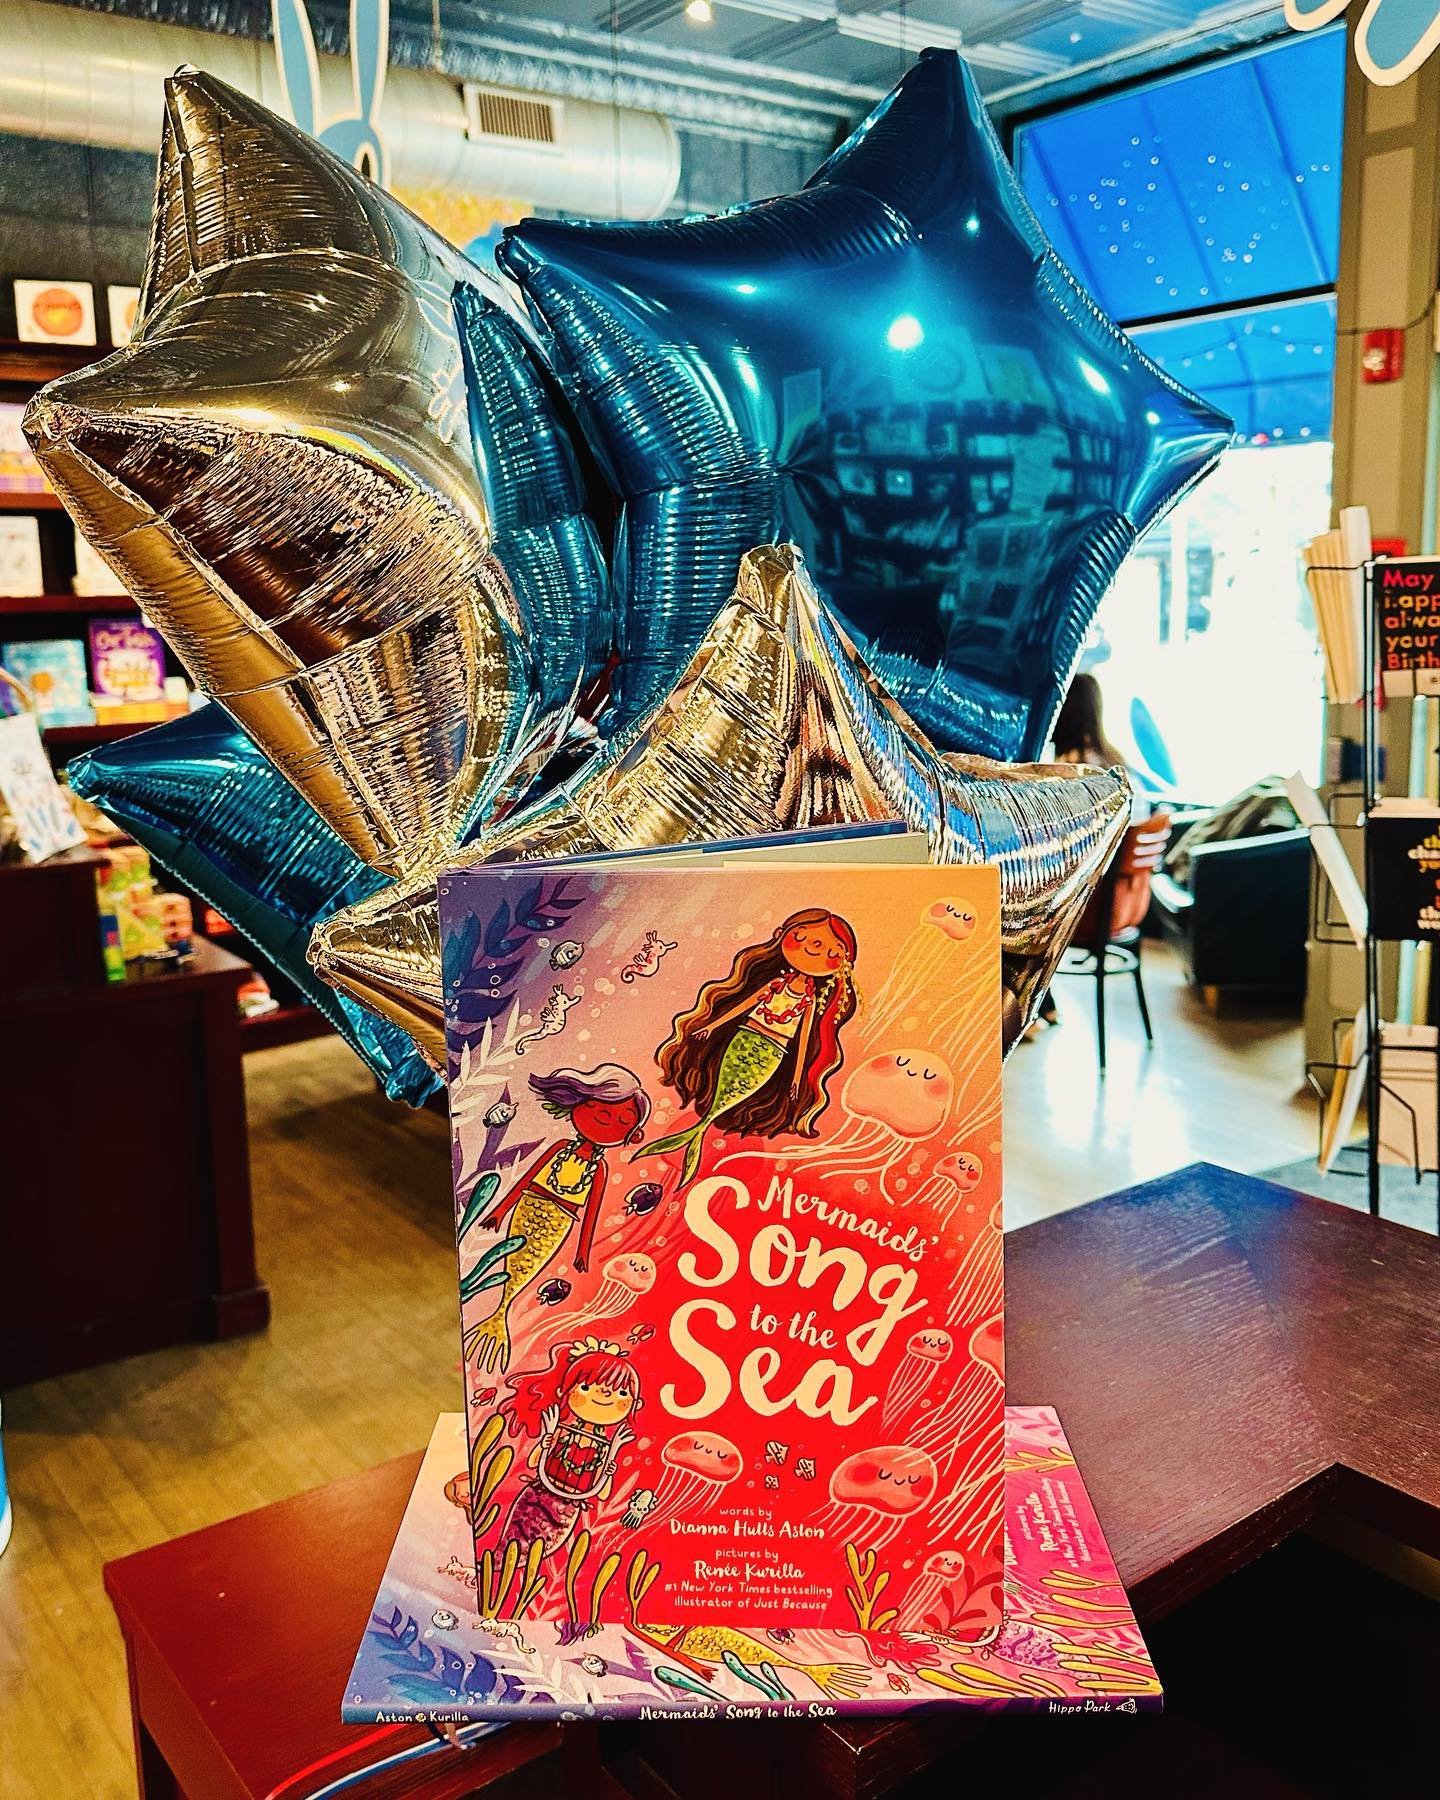 Happy #bookbirthday, @reneekurilla and Diana Hutts Aston! MERMAIDS SONG TO THE SEA is gorgeous and filled with fun ocean dwelling creatures! ❤️

Friends, join us at 11:00am Saturday, May 4th for a special storytime, signing, drawing demo, and craft w